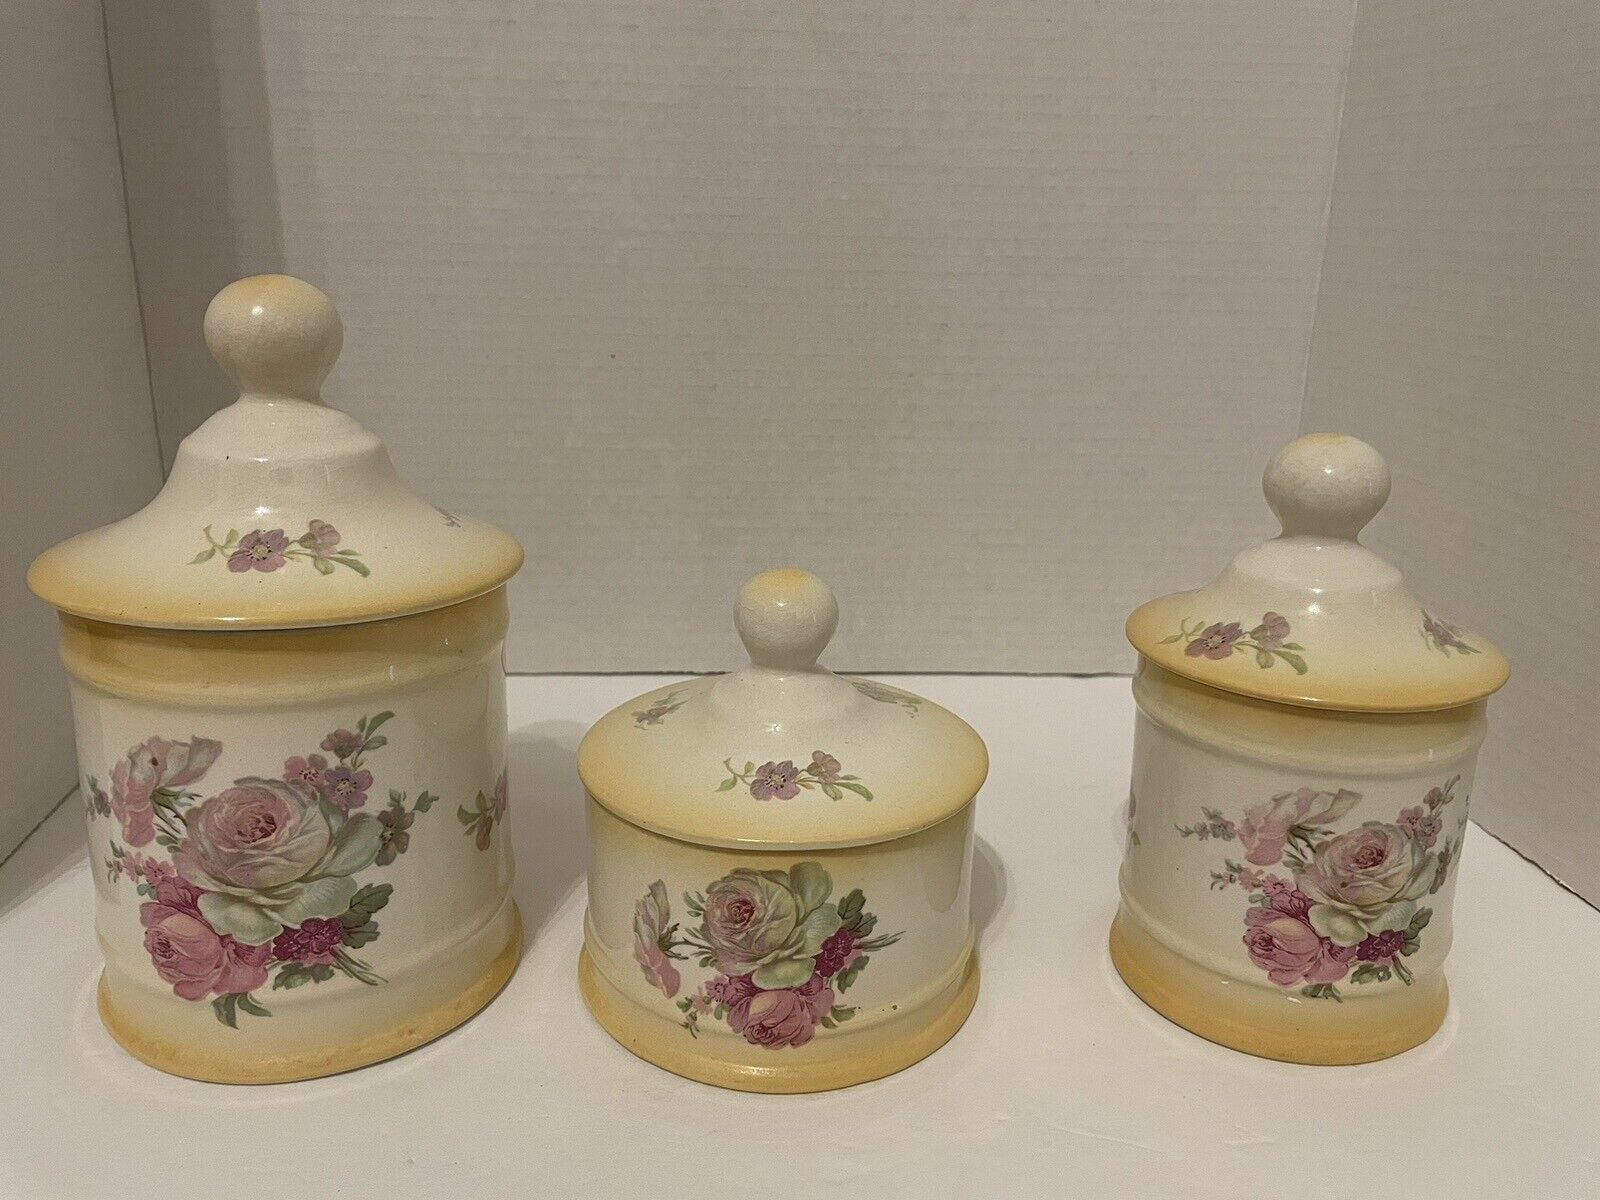 JAMES KENT OLD FOLEY STAFFORDSHIRE ENGLAND FLORAL 3 PIECE APOTHECARY JARS W/LIDS